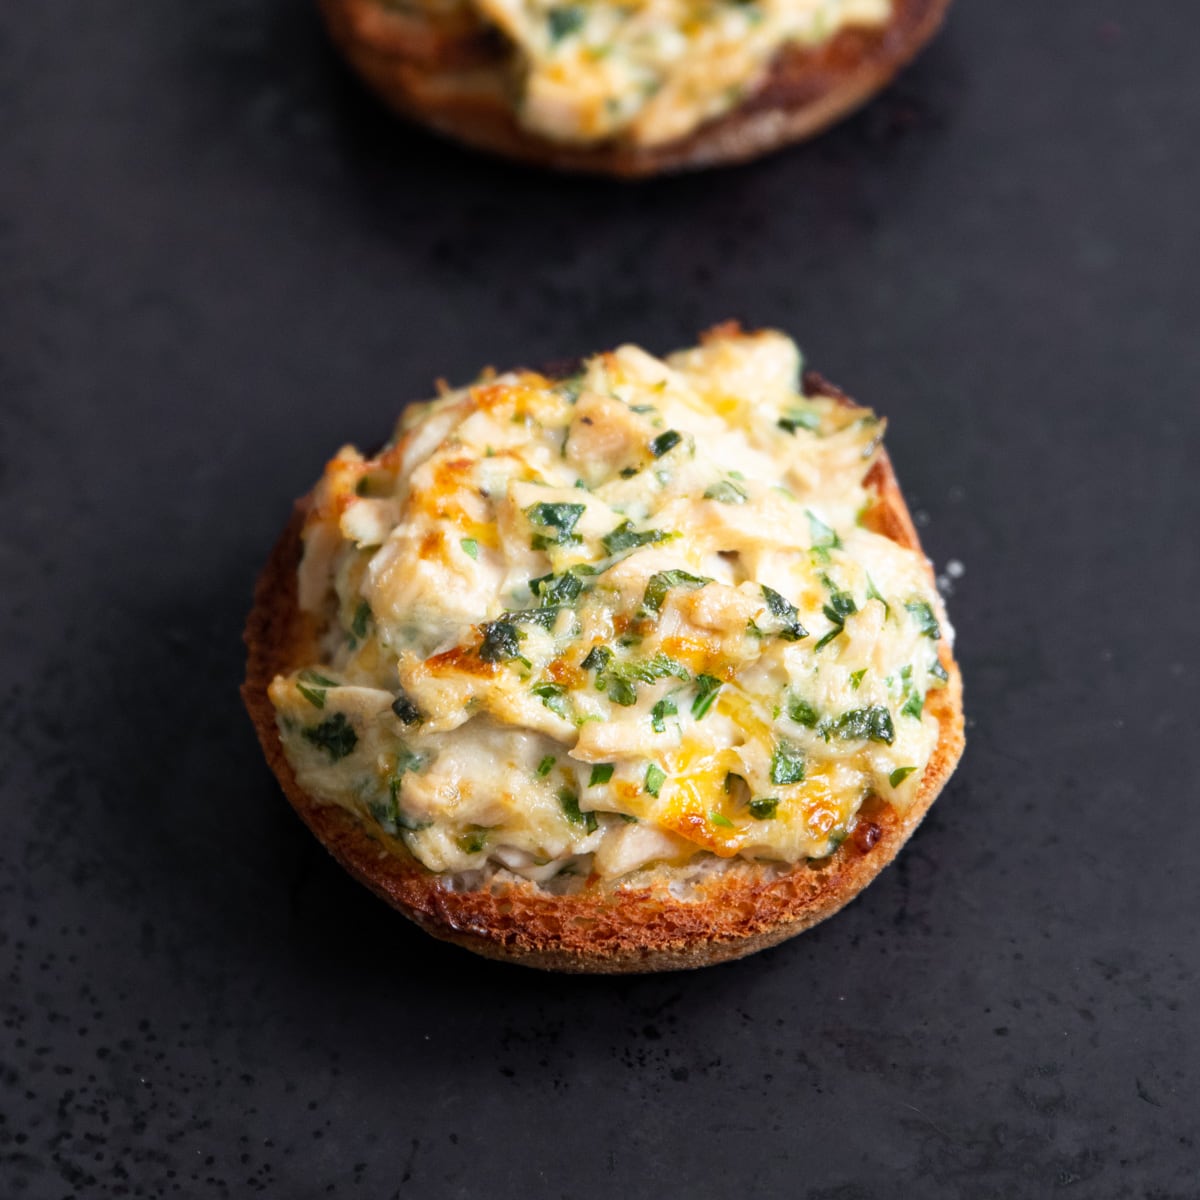 An English muffin half topped with a cheesy tuna salad that has been melted under a broiler.